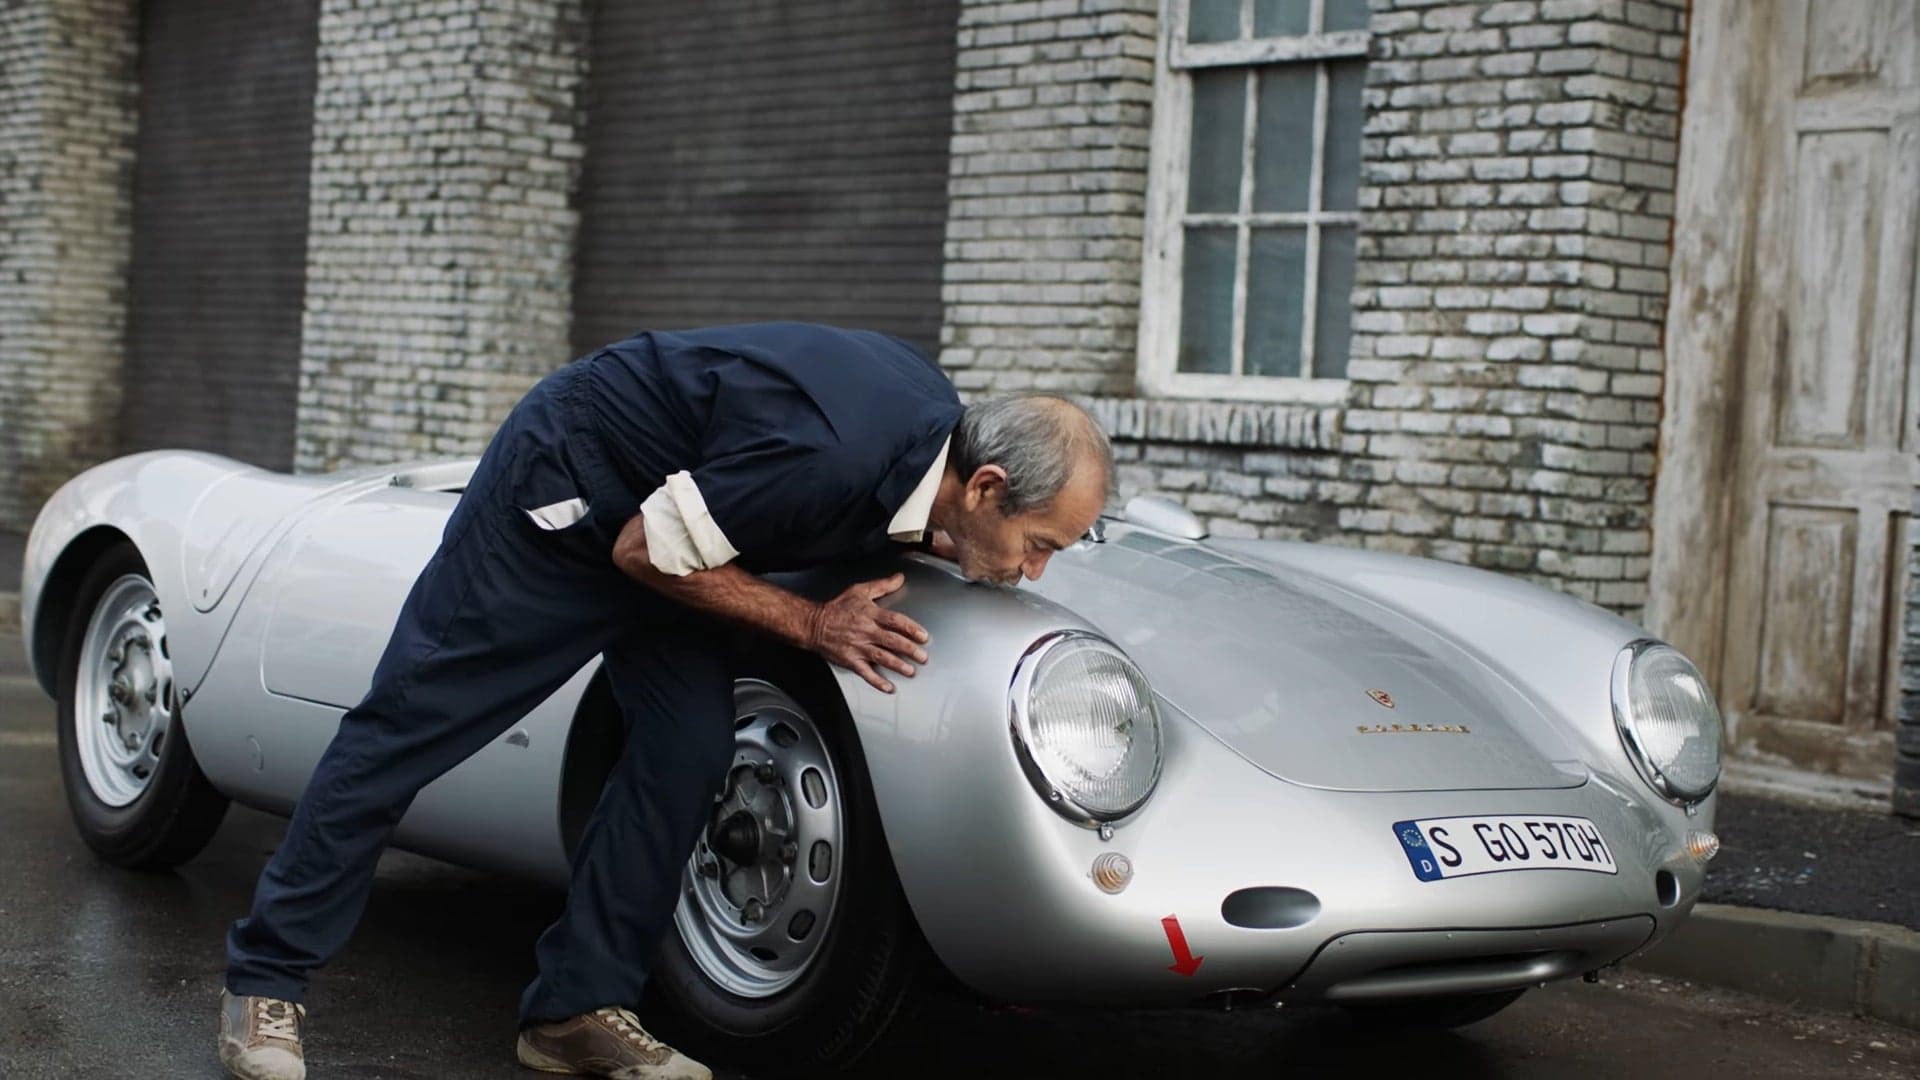 Porsche Commemorated Inaugural Sportscar Together Day With Touching Video